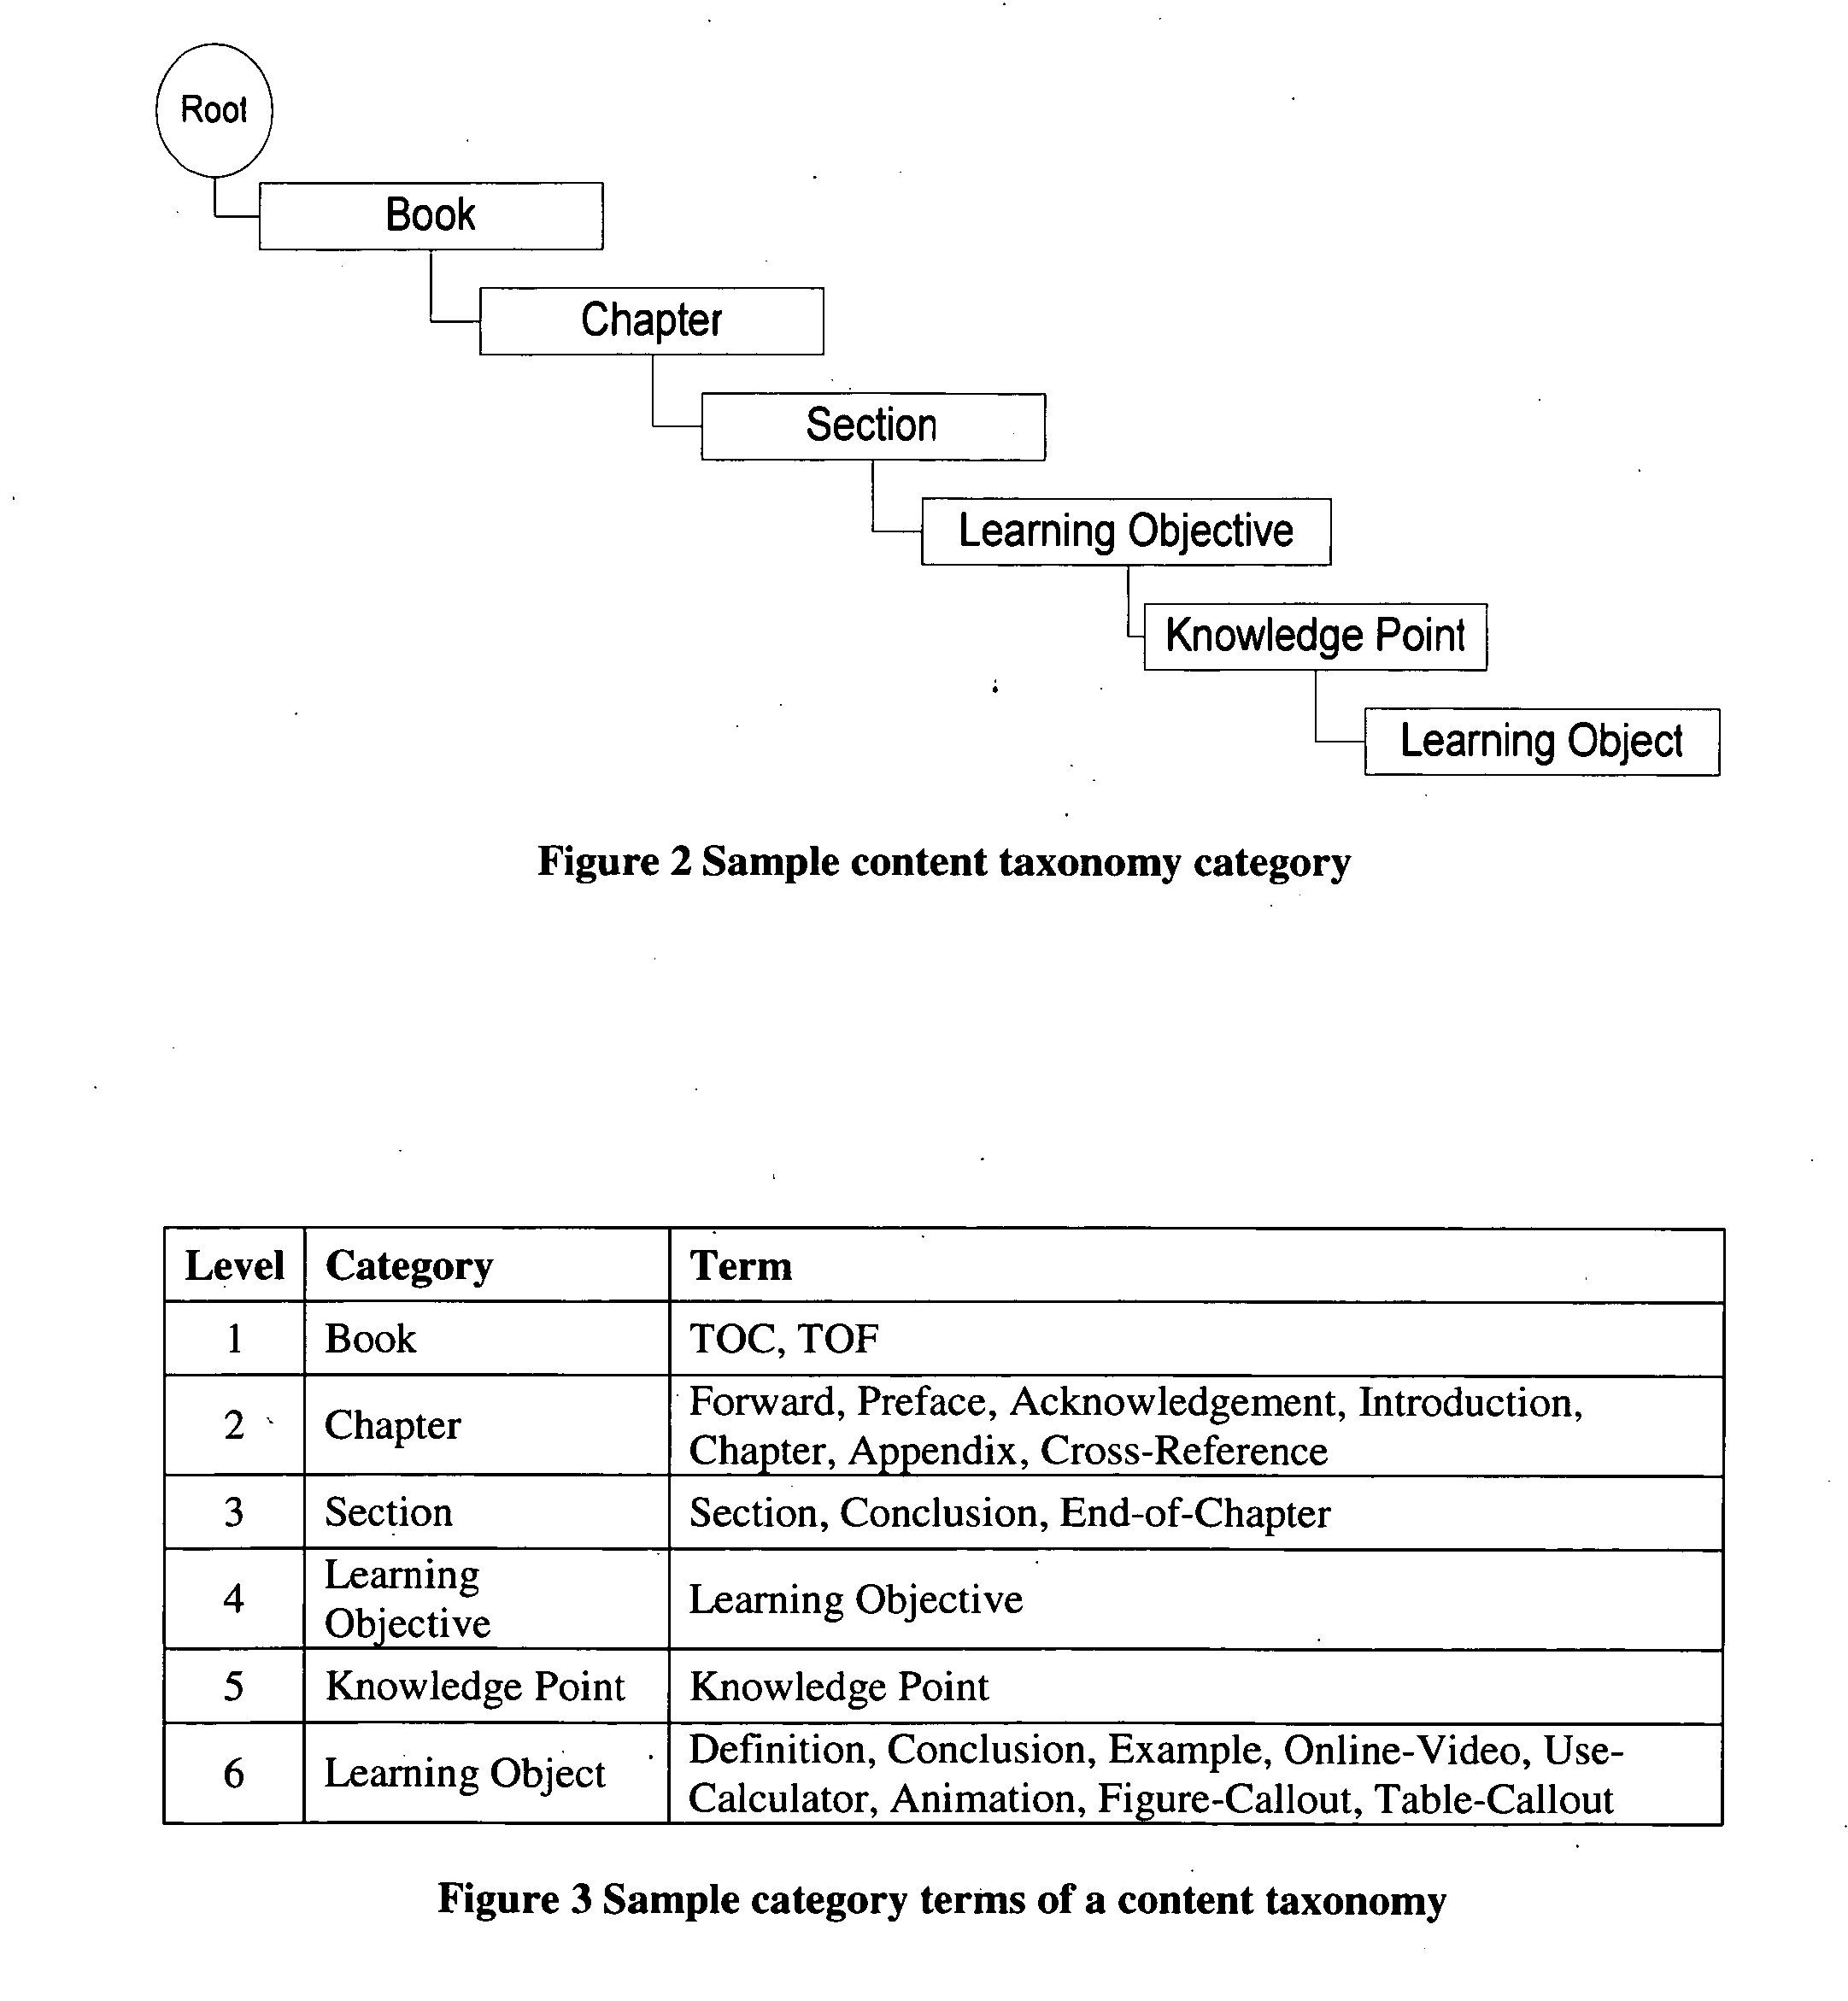 Method and System for Knowledge Diagnosis and Tutoring